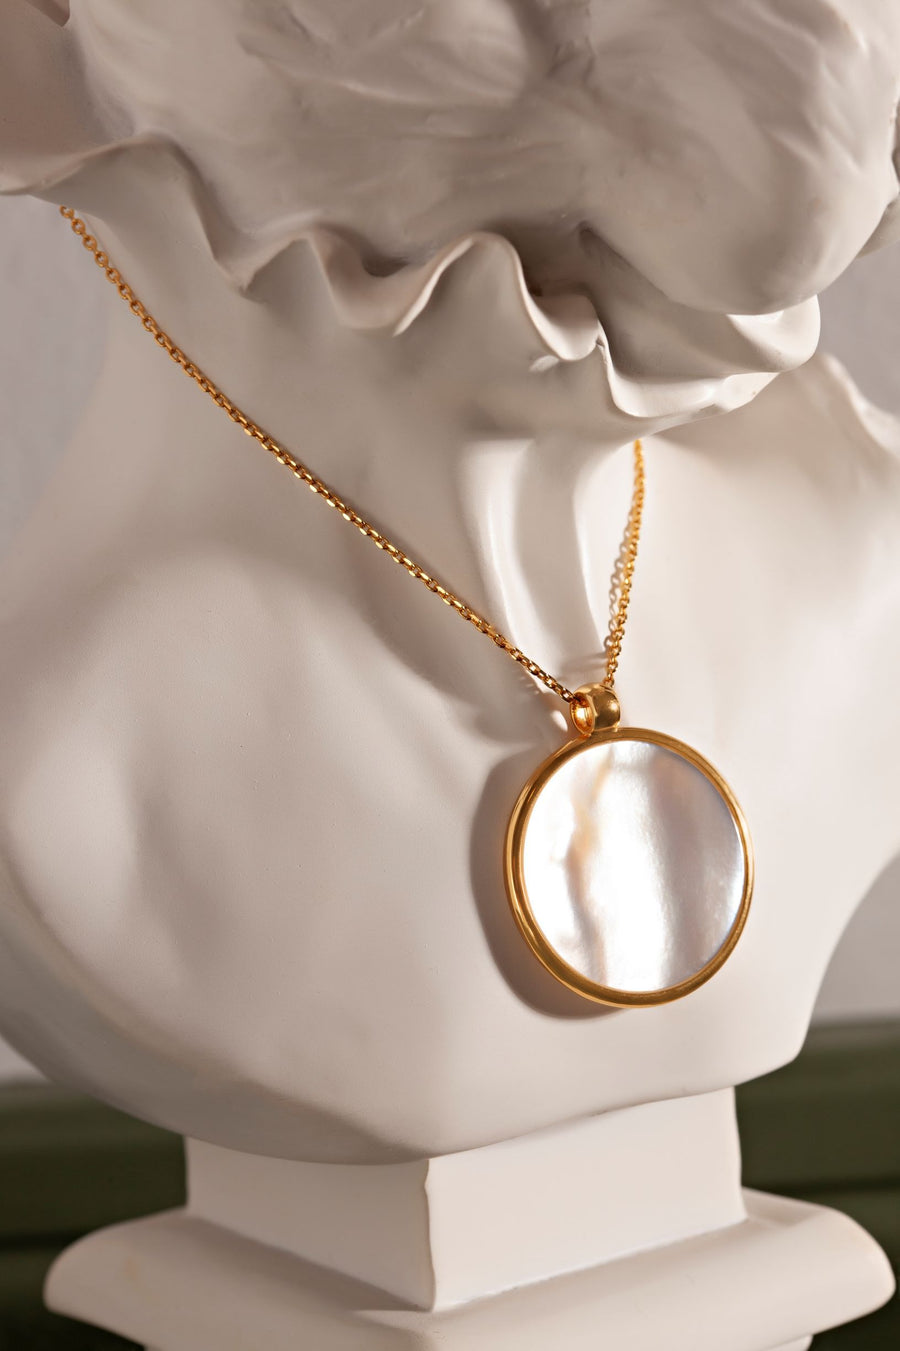 The Enriched Selene 18K Gold Plated Silver 925° Necklace